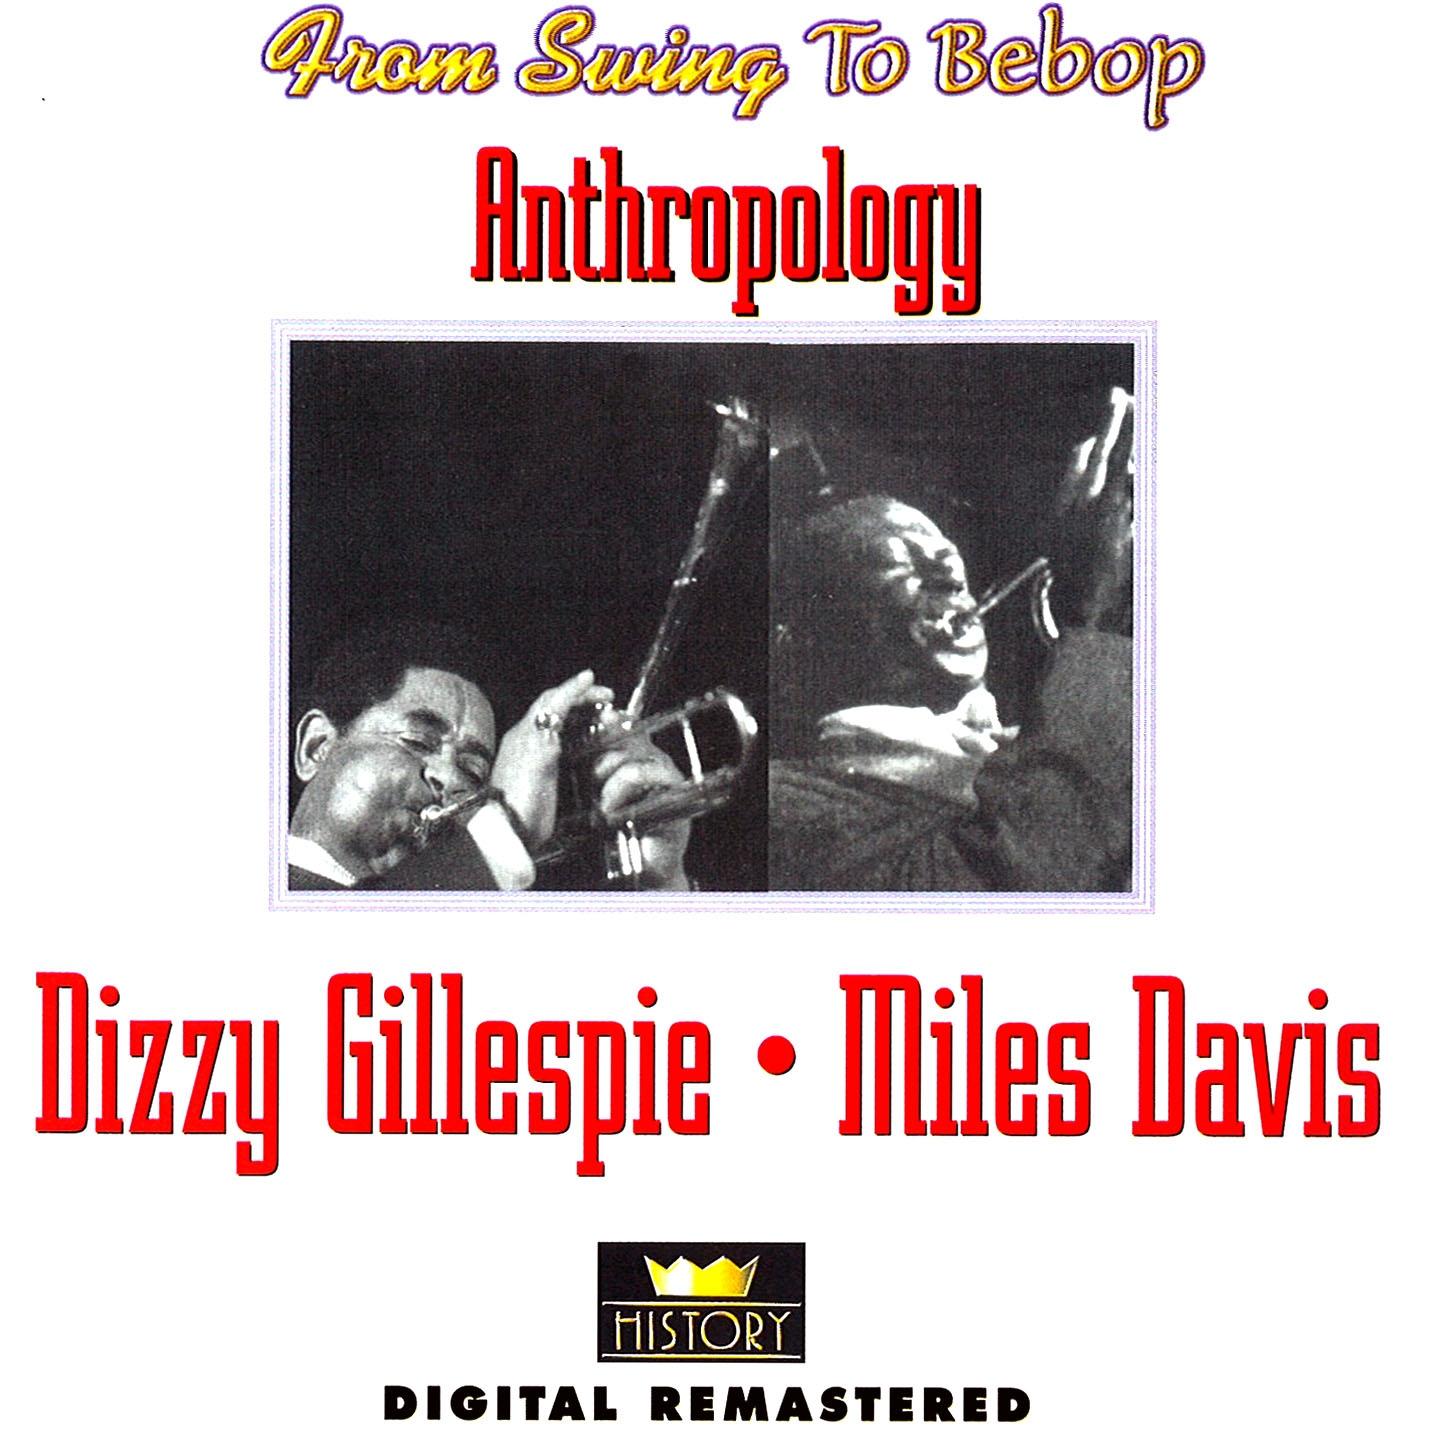 From Swing to Bebop: Anthropology